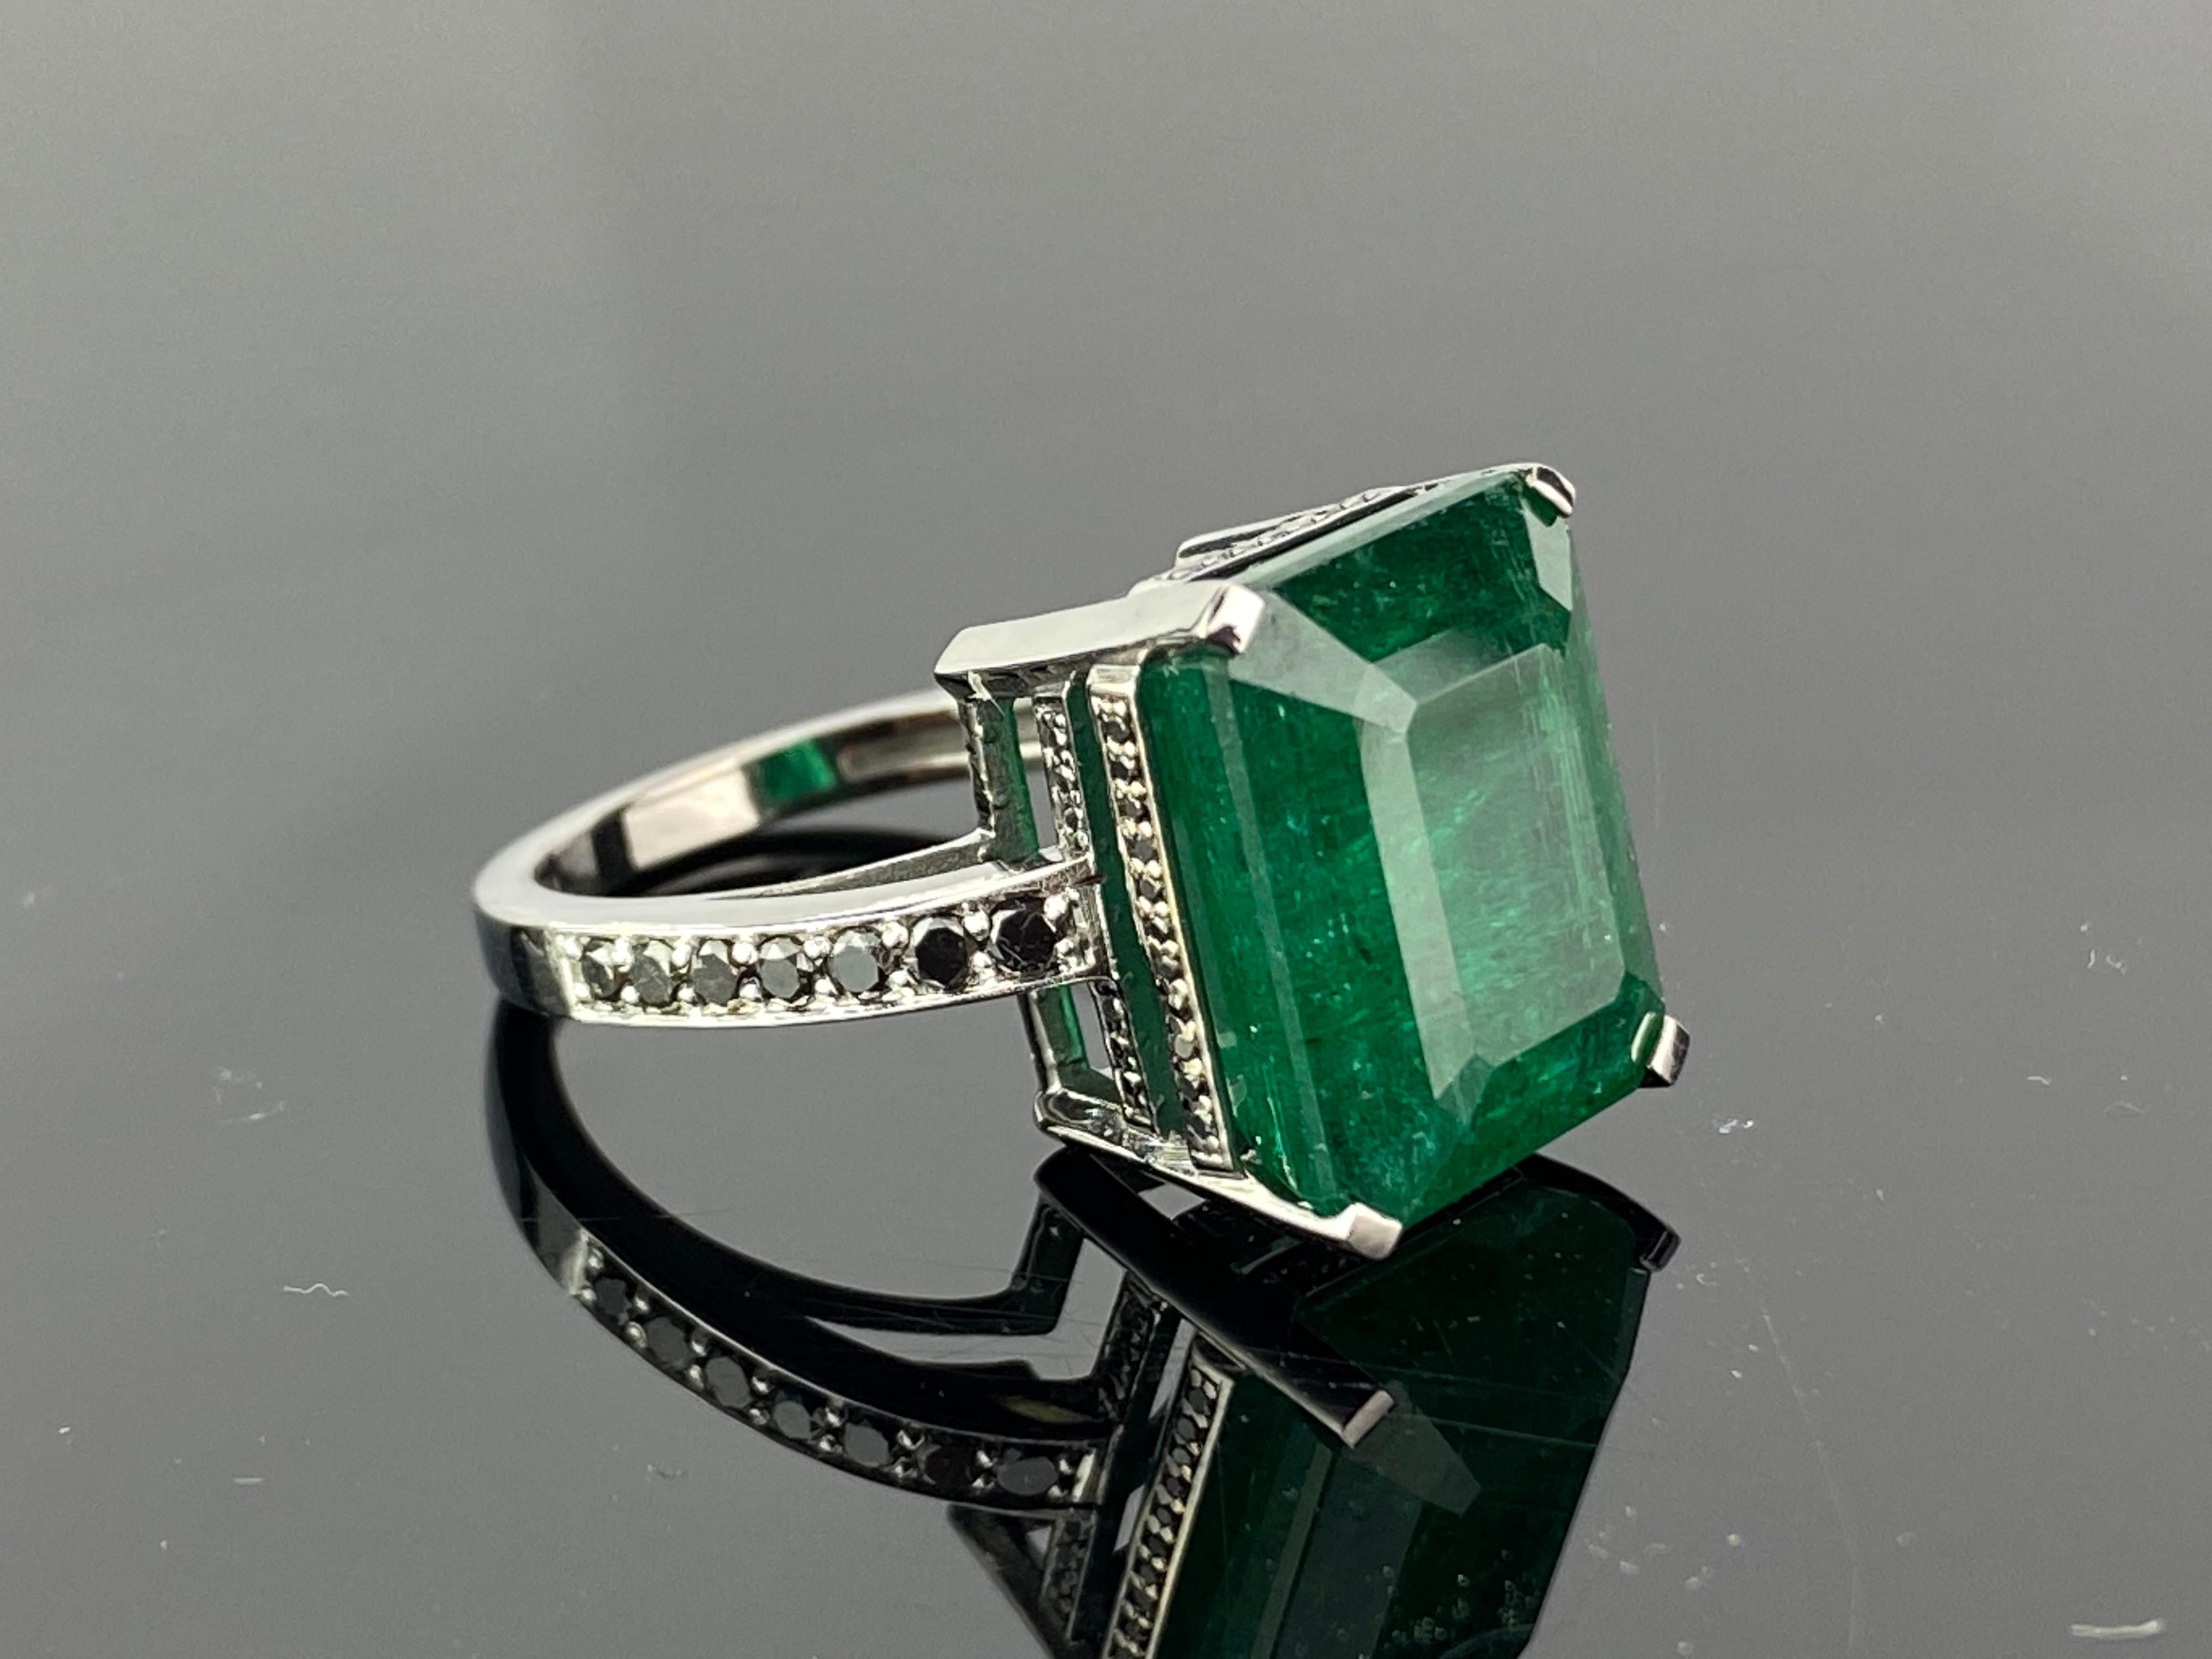 A unique 13.34 carat Zambian Emerald cocktail ring, with Black Diamonds set on the band - this ring is made in 18K Gold, which is black rhodium polished. Currently a ring size US 6, but we can resize the ring for you without additional cost. A video